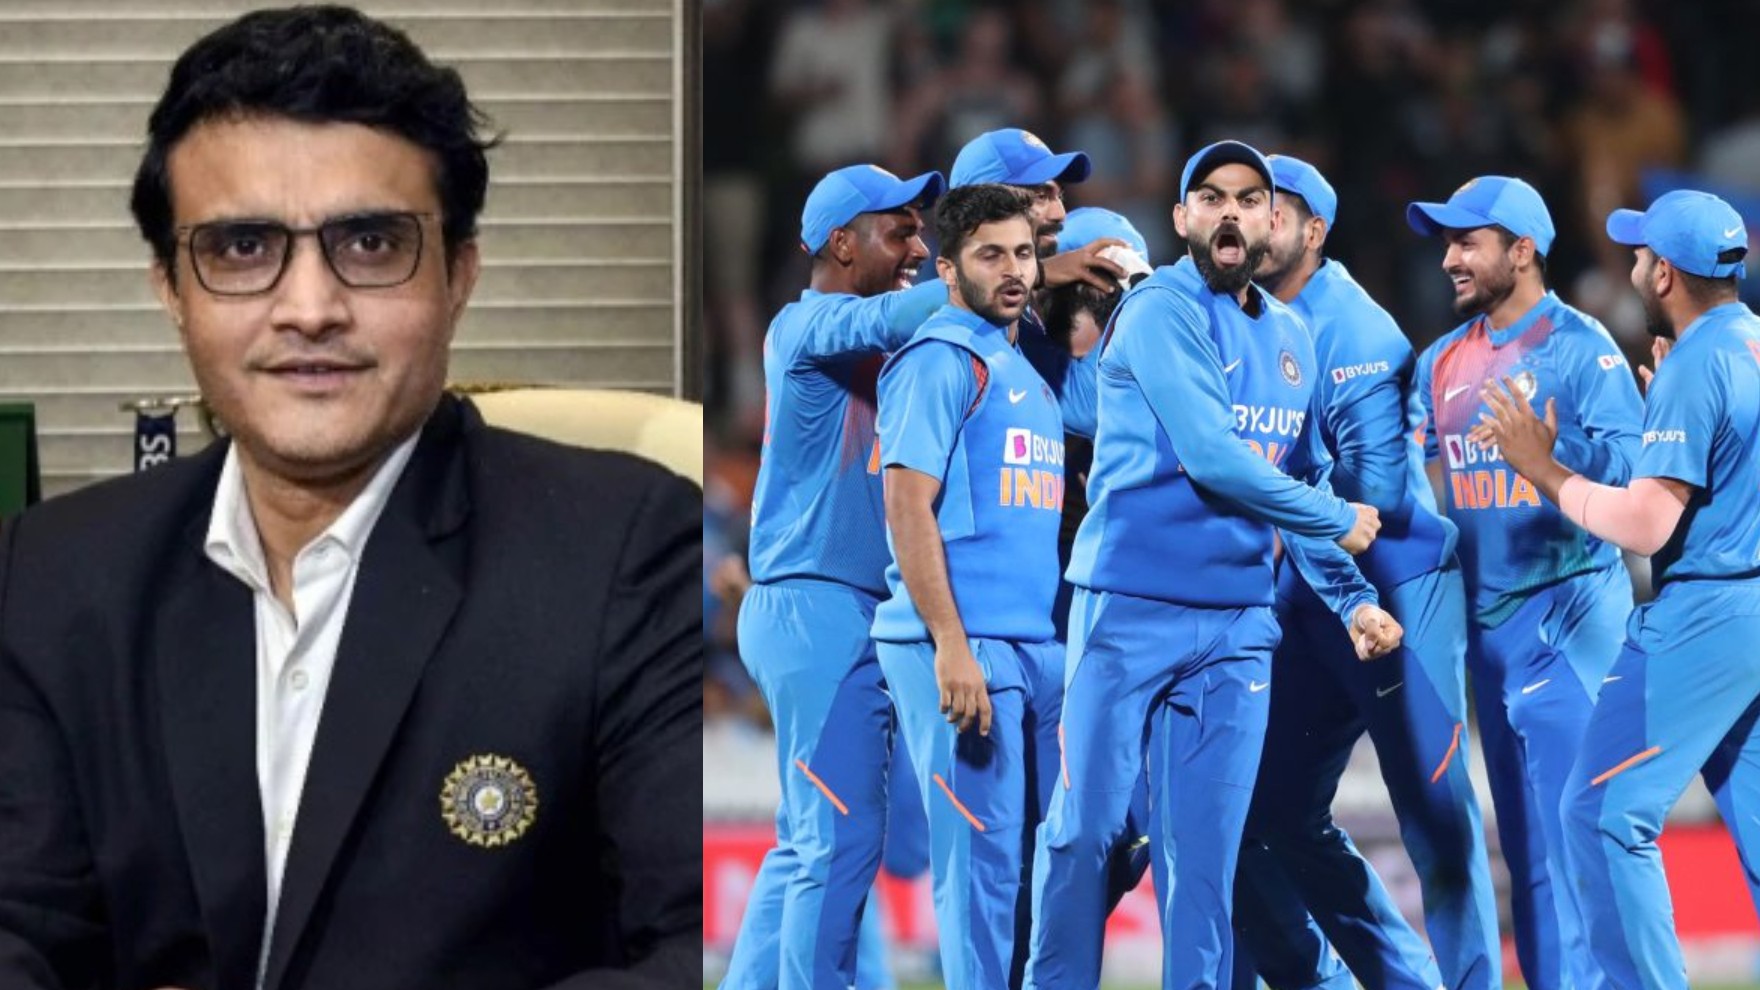 Team India wishes BCCI President Sourav Ganguly ‘Happy Birthday’ as he turns 48